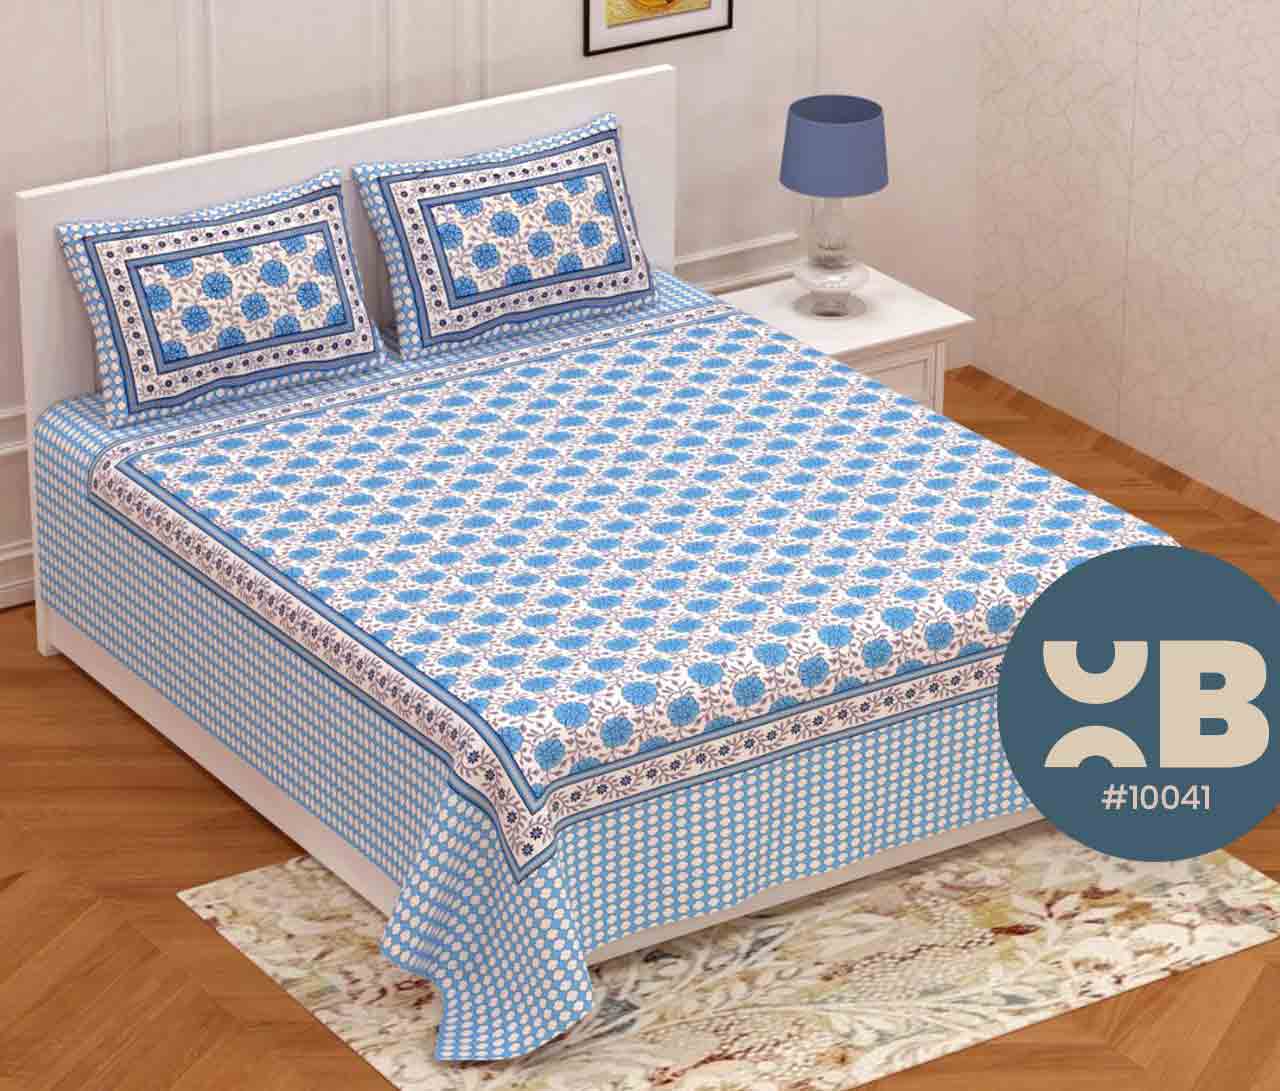 Sky Blue Printed Queen Size Double Bedsheet With Two Pillow Covers (100x100)